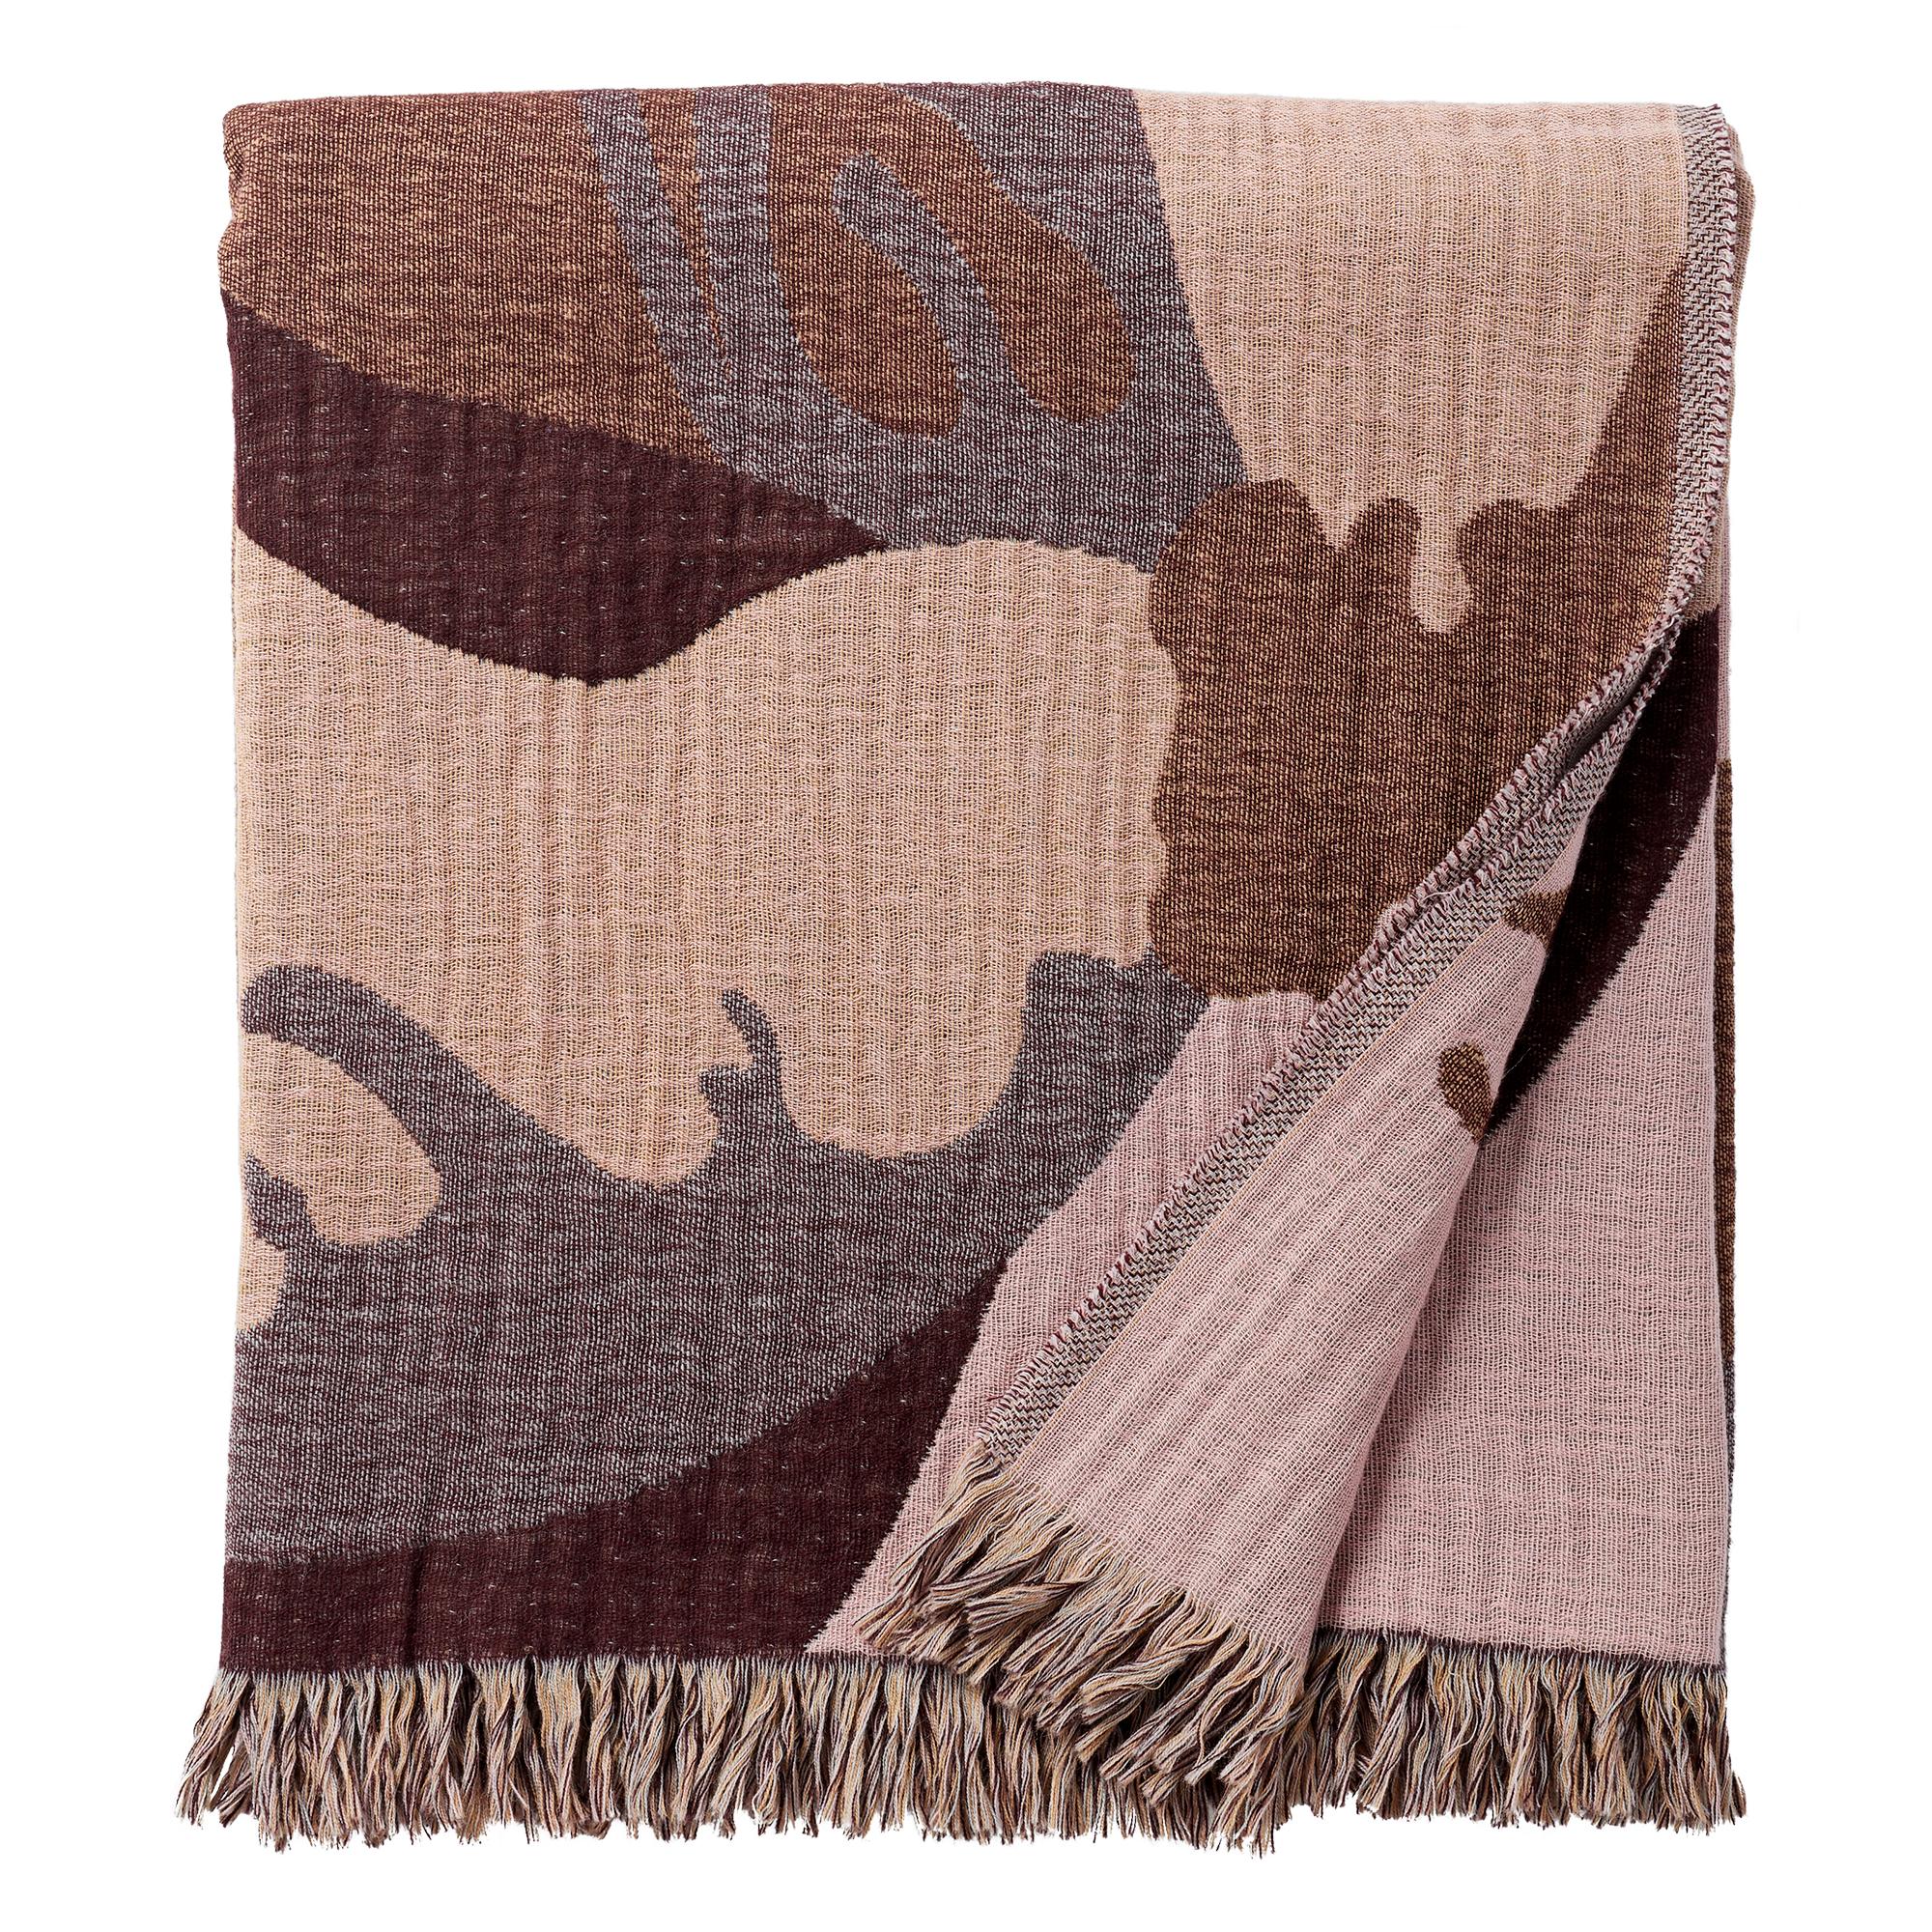 Les Fleurs Multi-Color Wool and Bamboo Woven Throw Cover